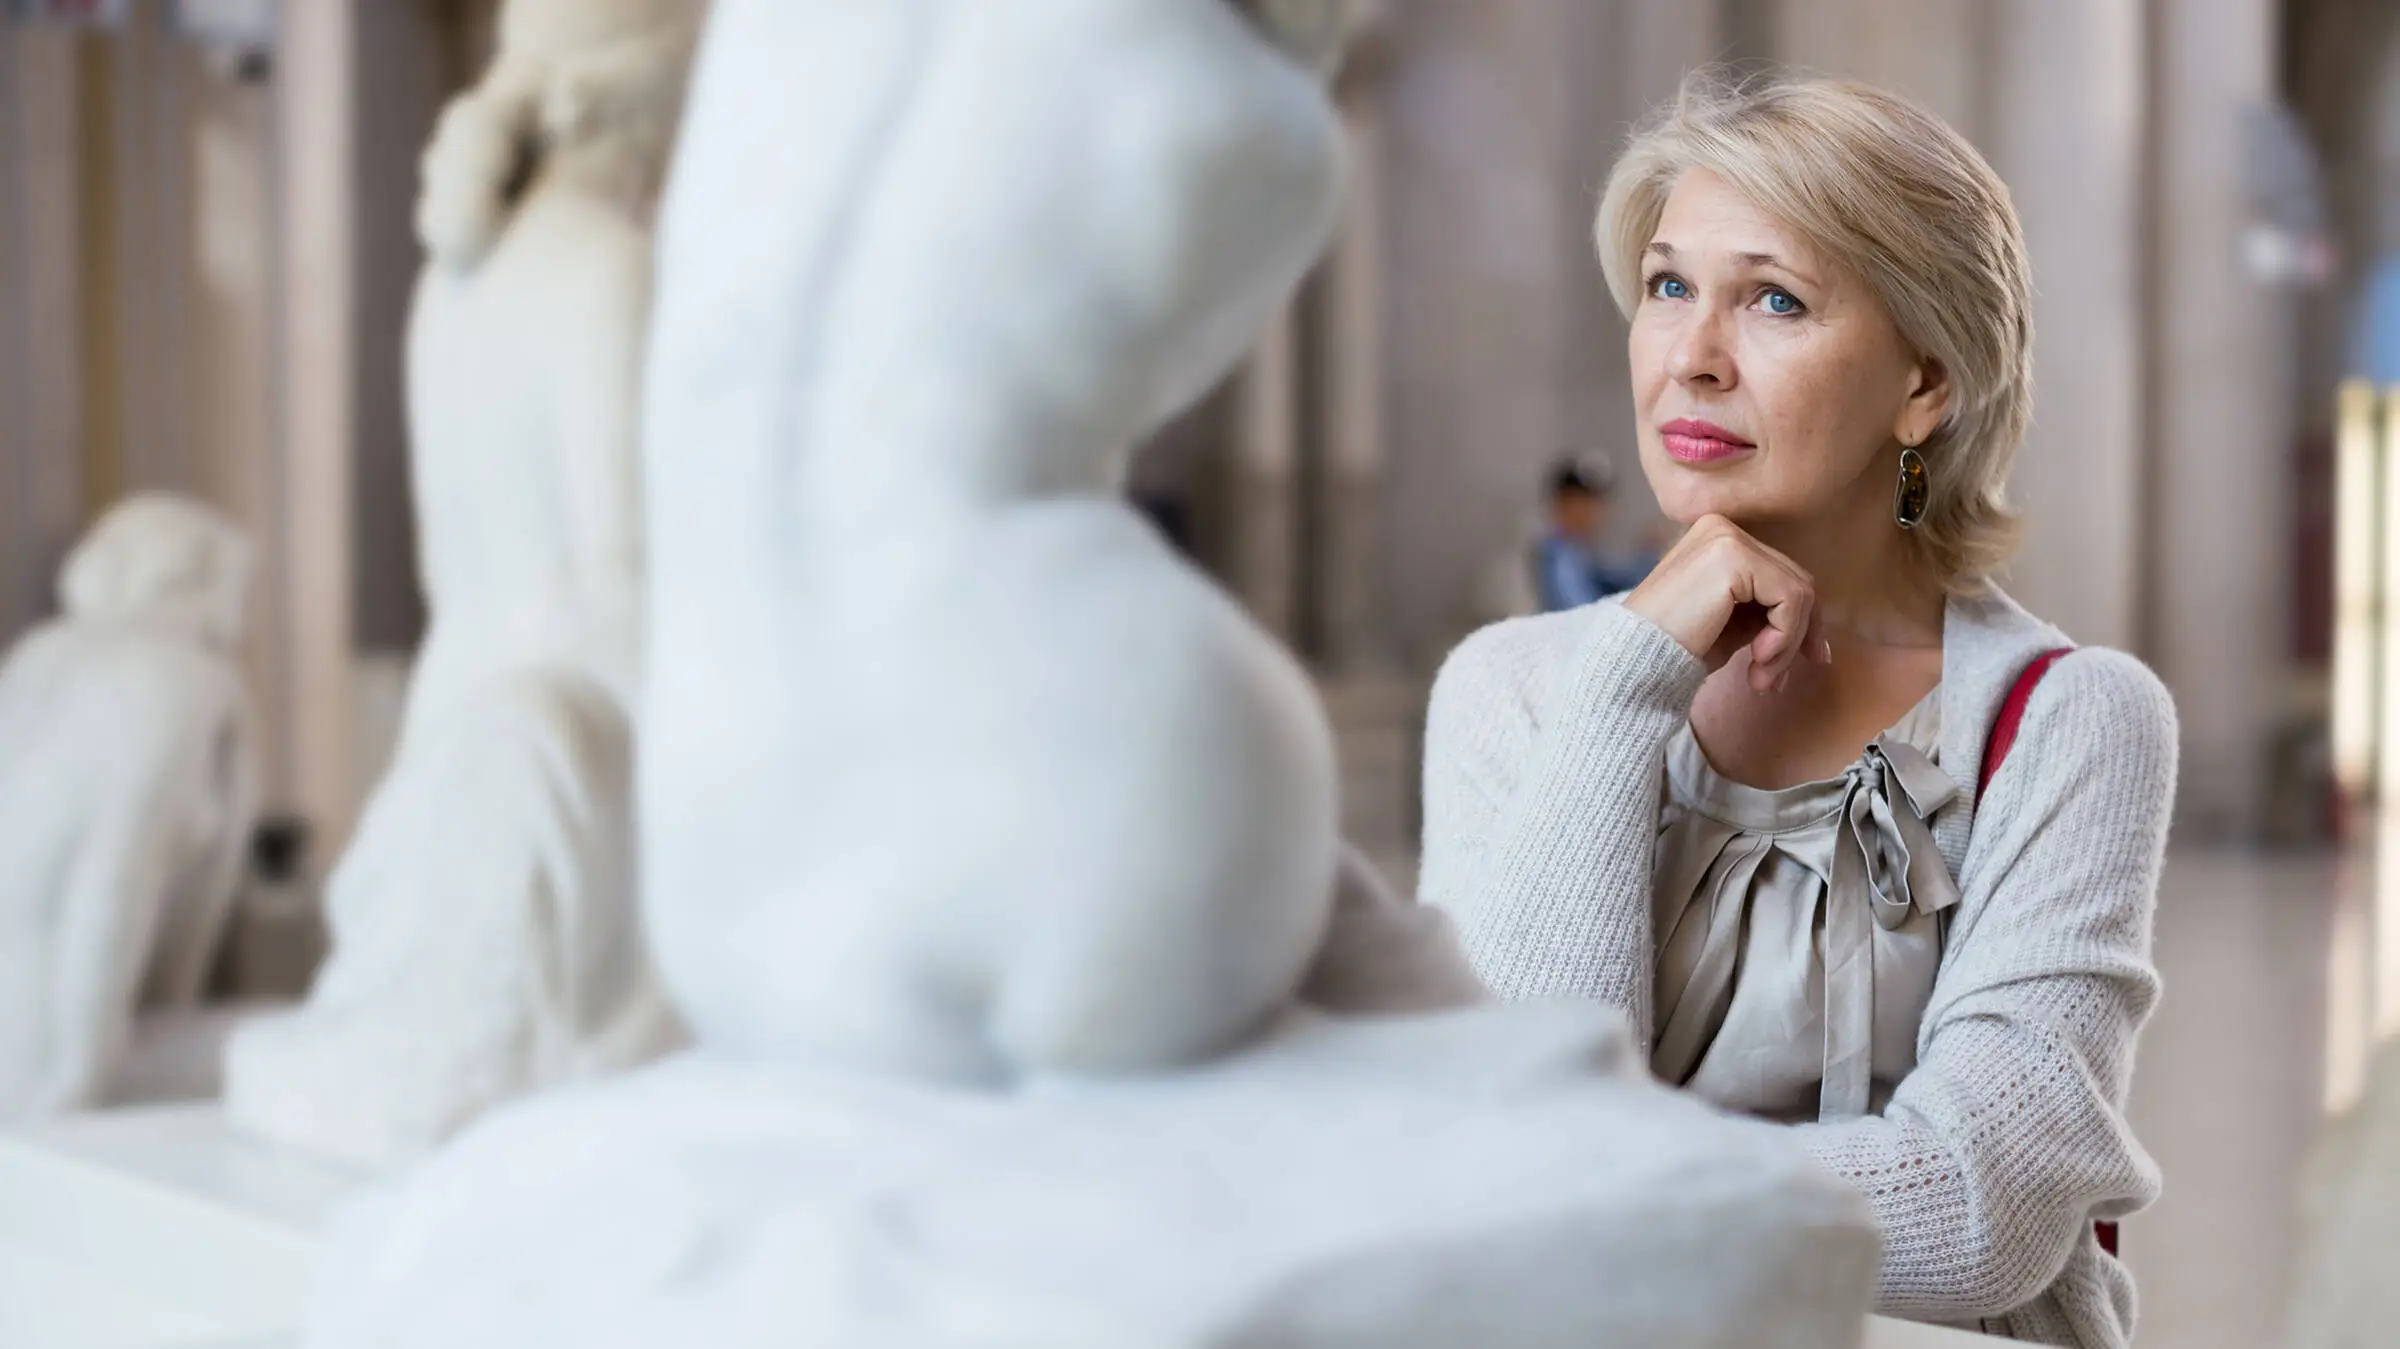 Woman looking at a white sculpture of a woman